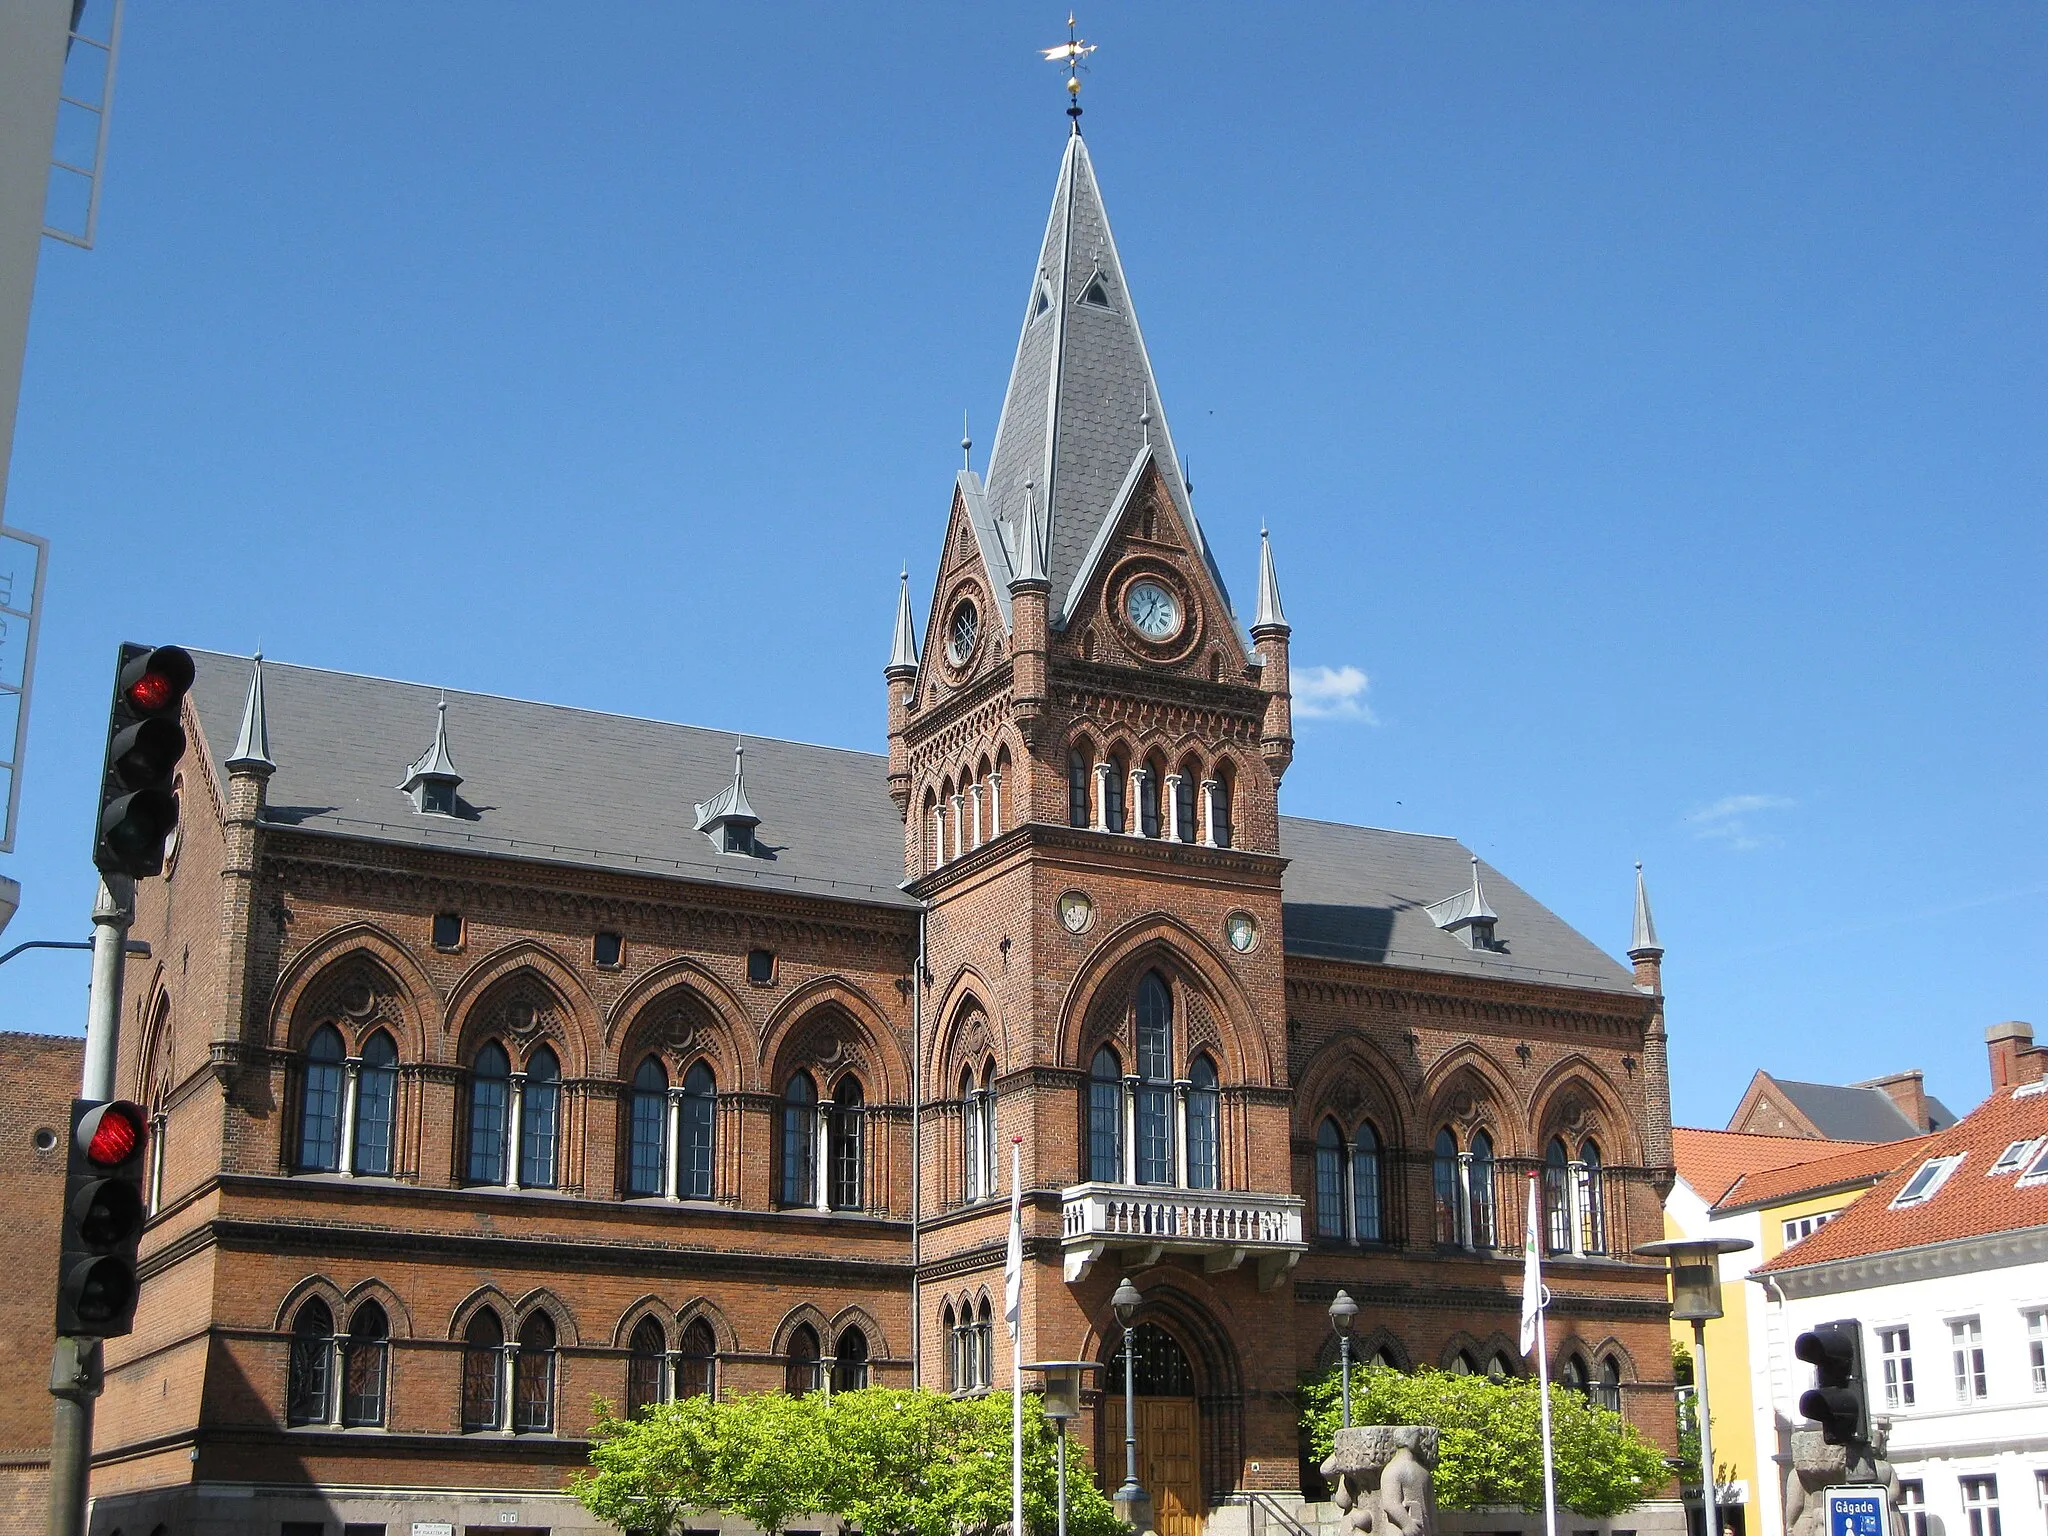 Photo showing: The town hall "Vejle Rådhus" in the town "Vejle". The town is located in South-Central Jutland, Denmark.